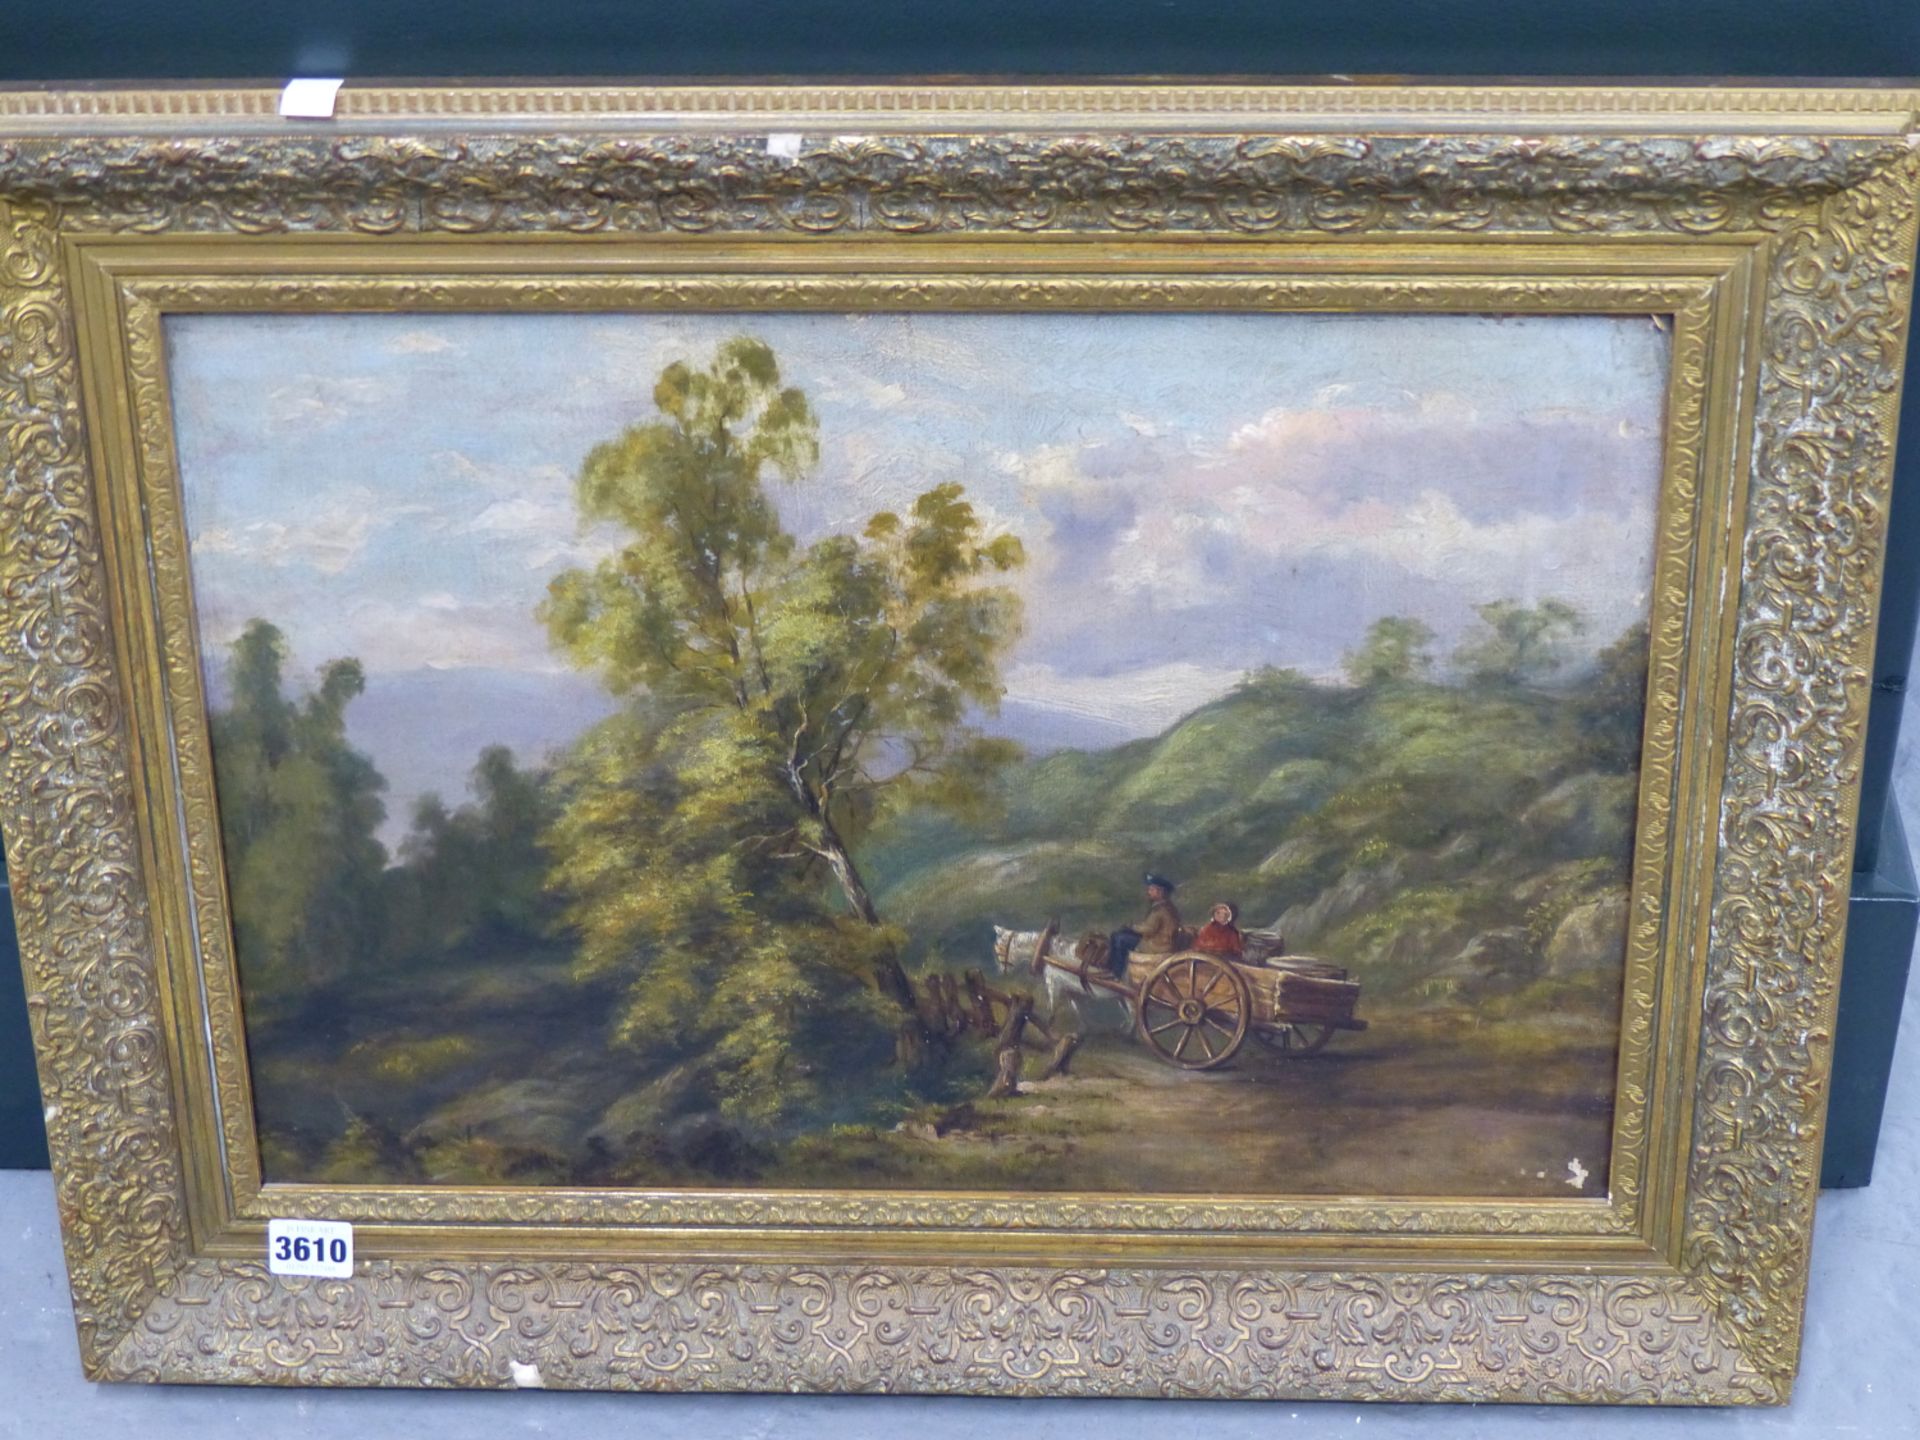 19TH CENTURY, ENGLISH SCHOOL. HORSE AND CART WITHIN RUGGED LANDSCAPE, OIL ON CANVAS.39 X 35 cm. - Image 2 of 7